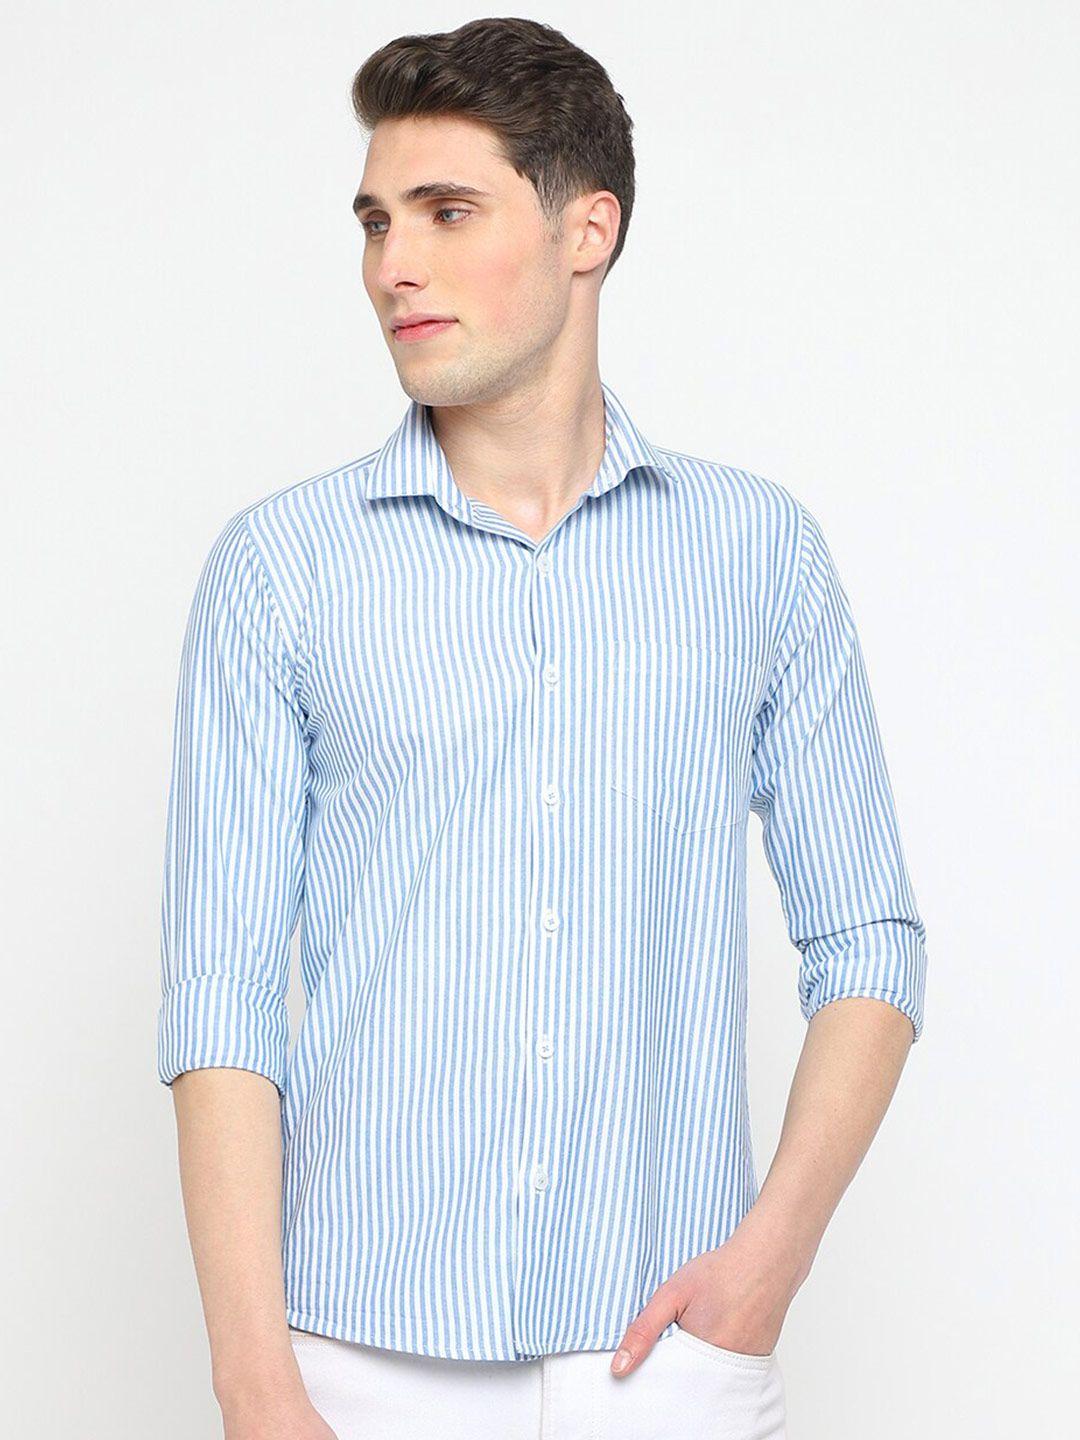 jadeberry classic slim fit opaque striped cotton formal shirt